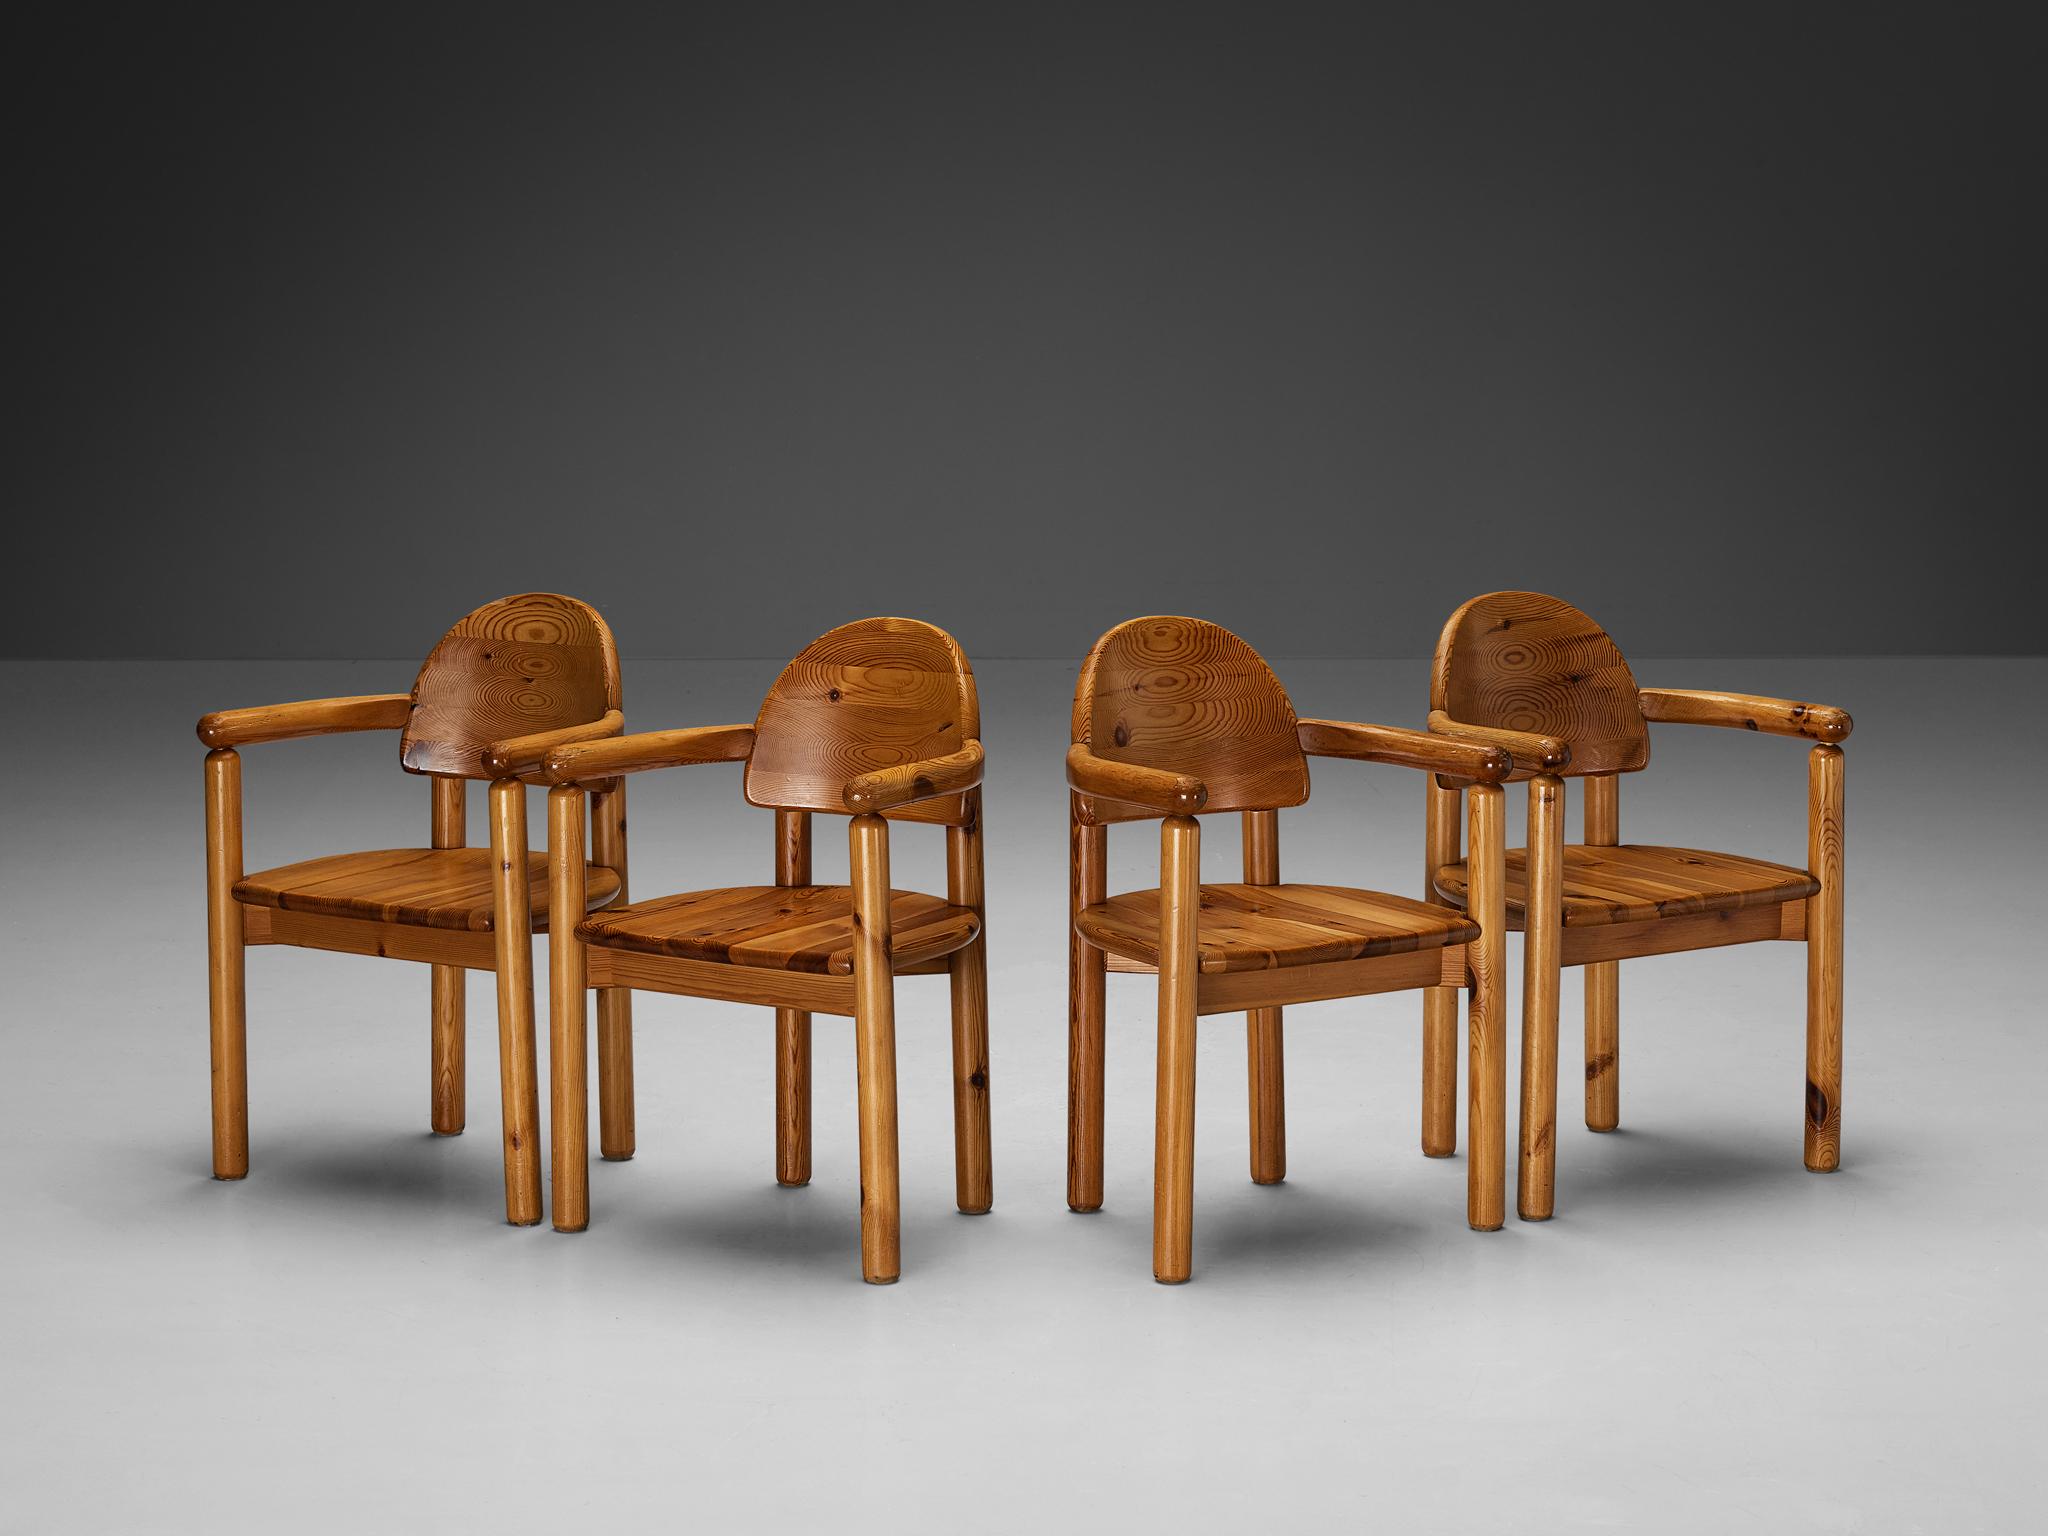 Rainer Daumiller for Hirtshals Savvaerk, set of four armchairs, pine, Denmark, 1970s
 
These dining chairs by Danish designer Rainer Daumiller have multiple features. The vivid grain of the warm pine wood contributes to the natural expressiveness of